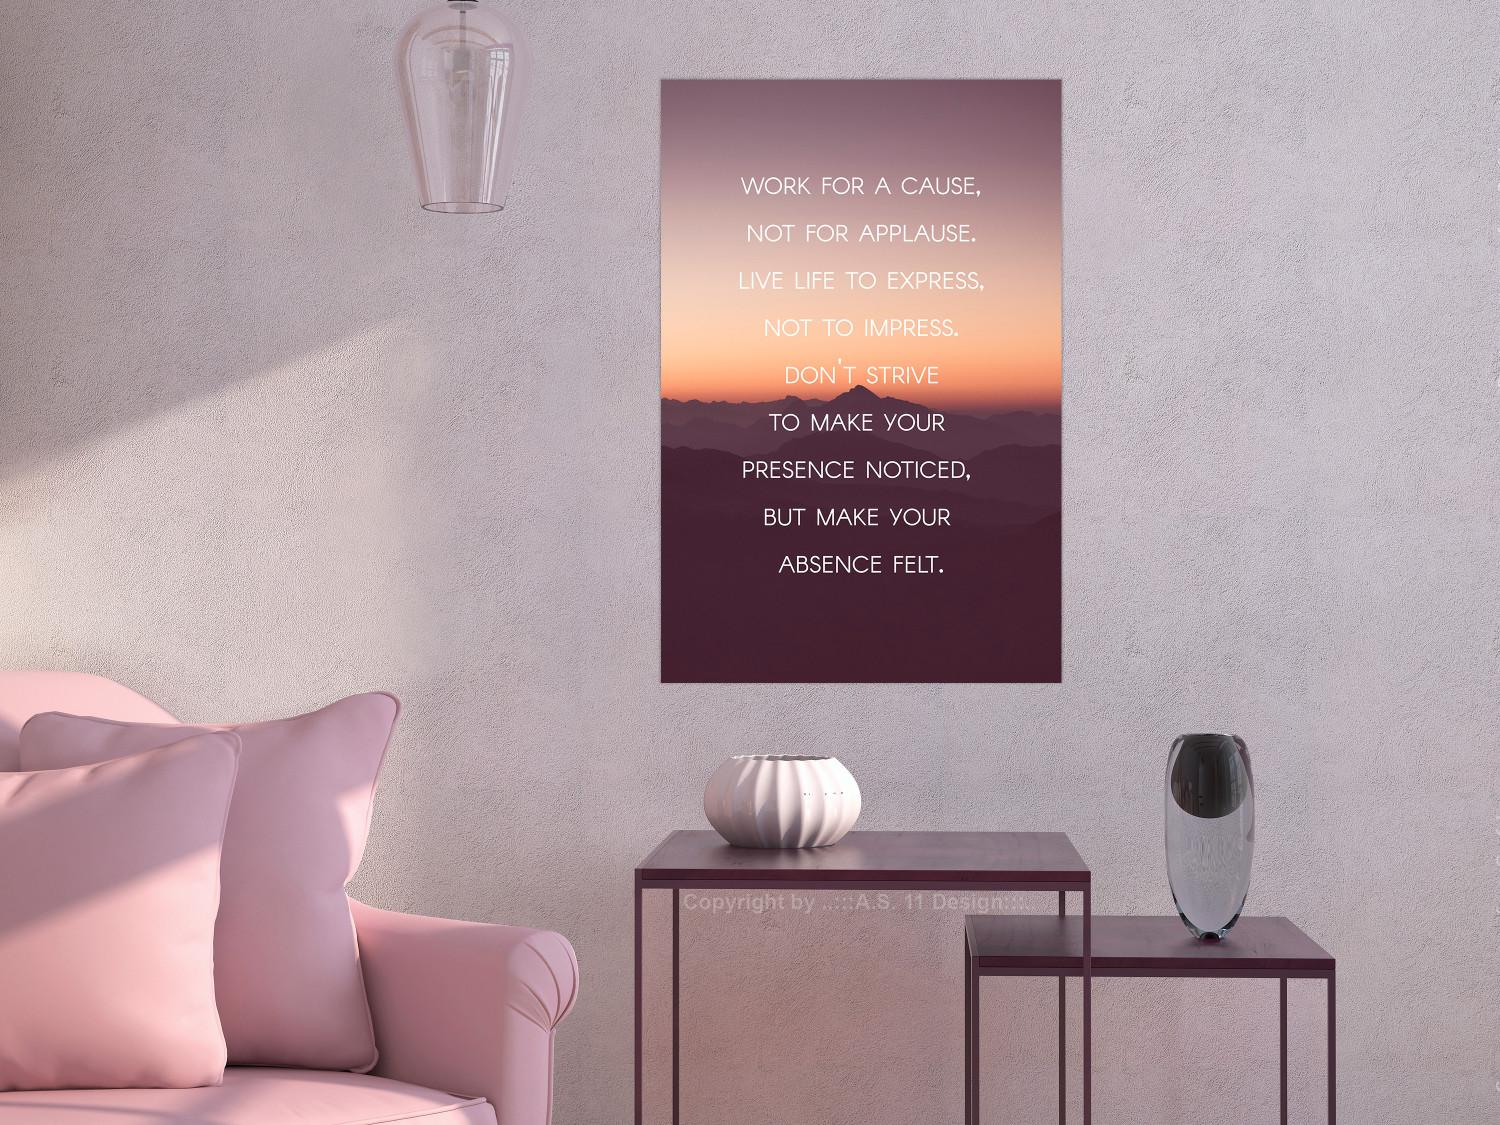 Poster Make your absence felt - motivational texts against a sunset background